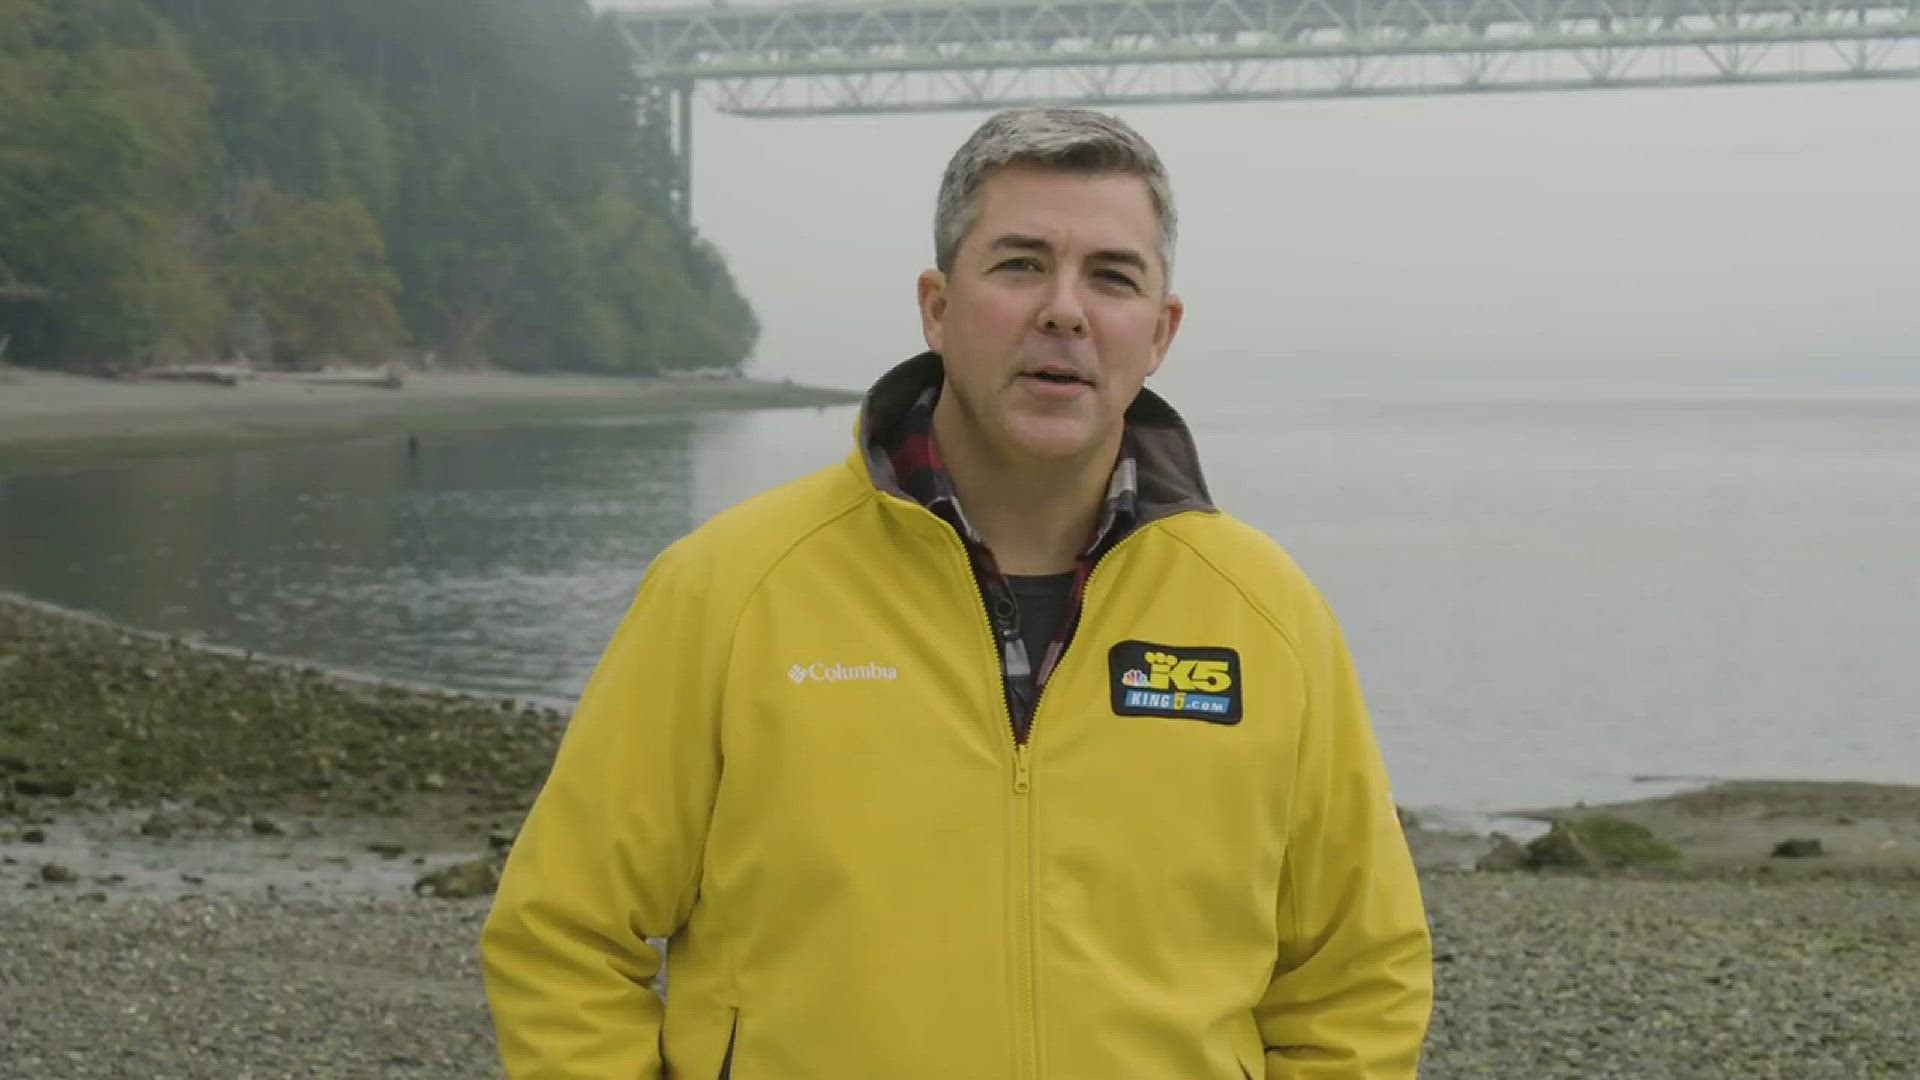 KING 5 anchor Greg Copeland shares his story.